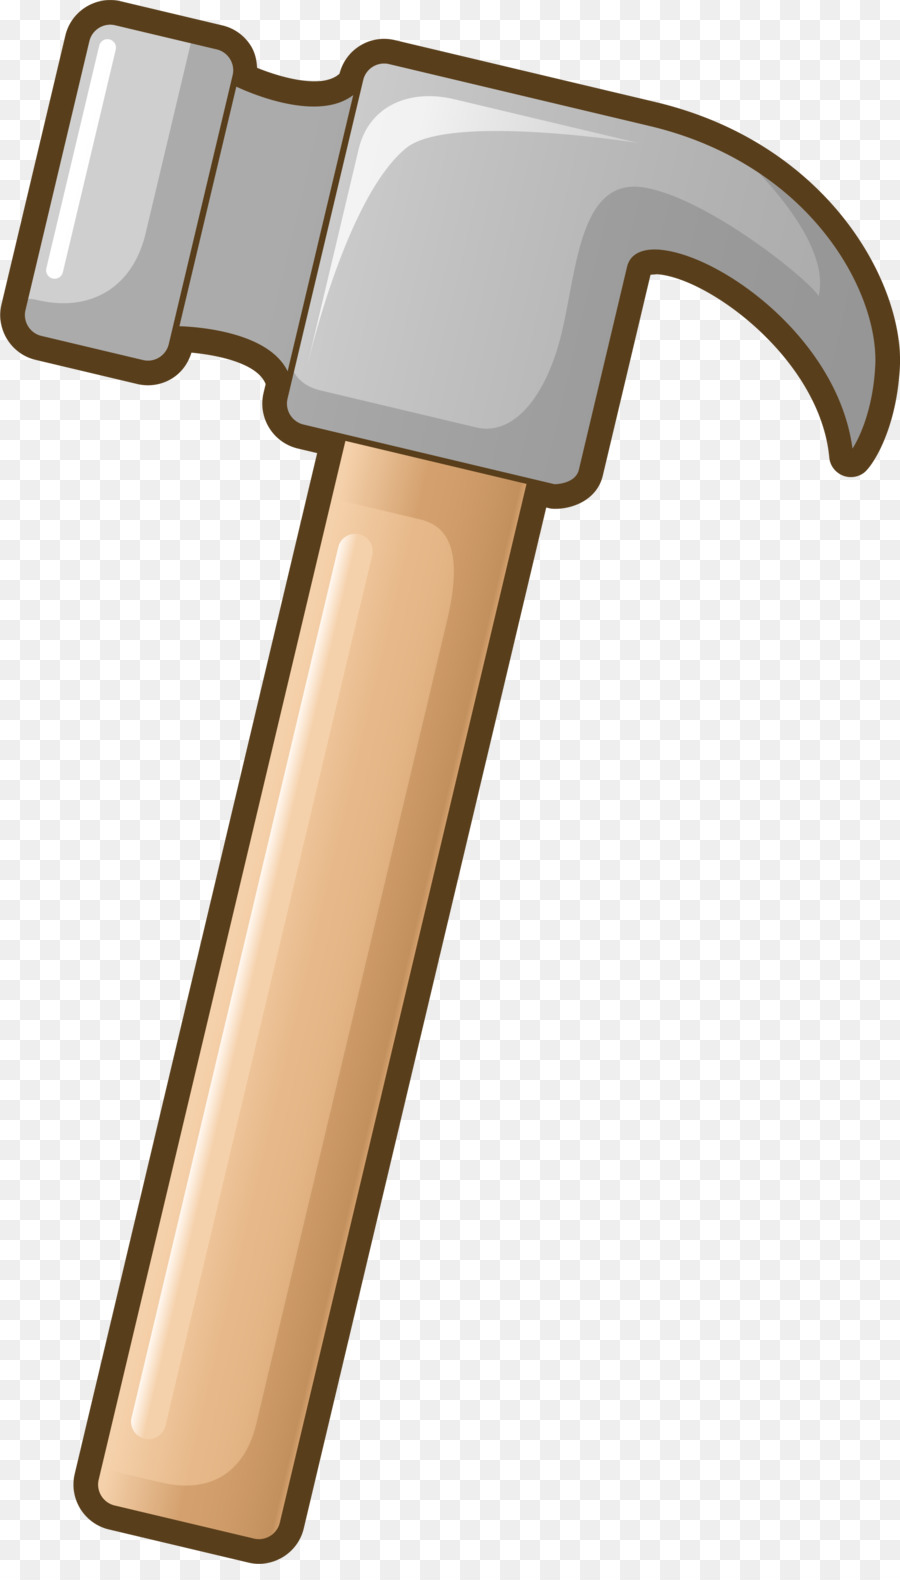 Hammer Tool Cartoon - Simple gray hammer png download - 3001*5214 - Free Transparent Hammer png Download.